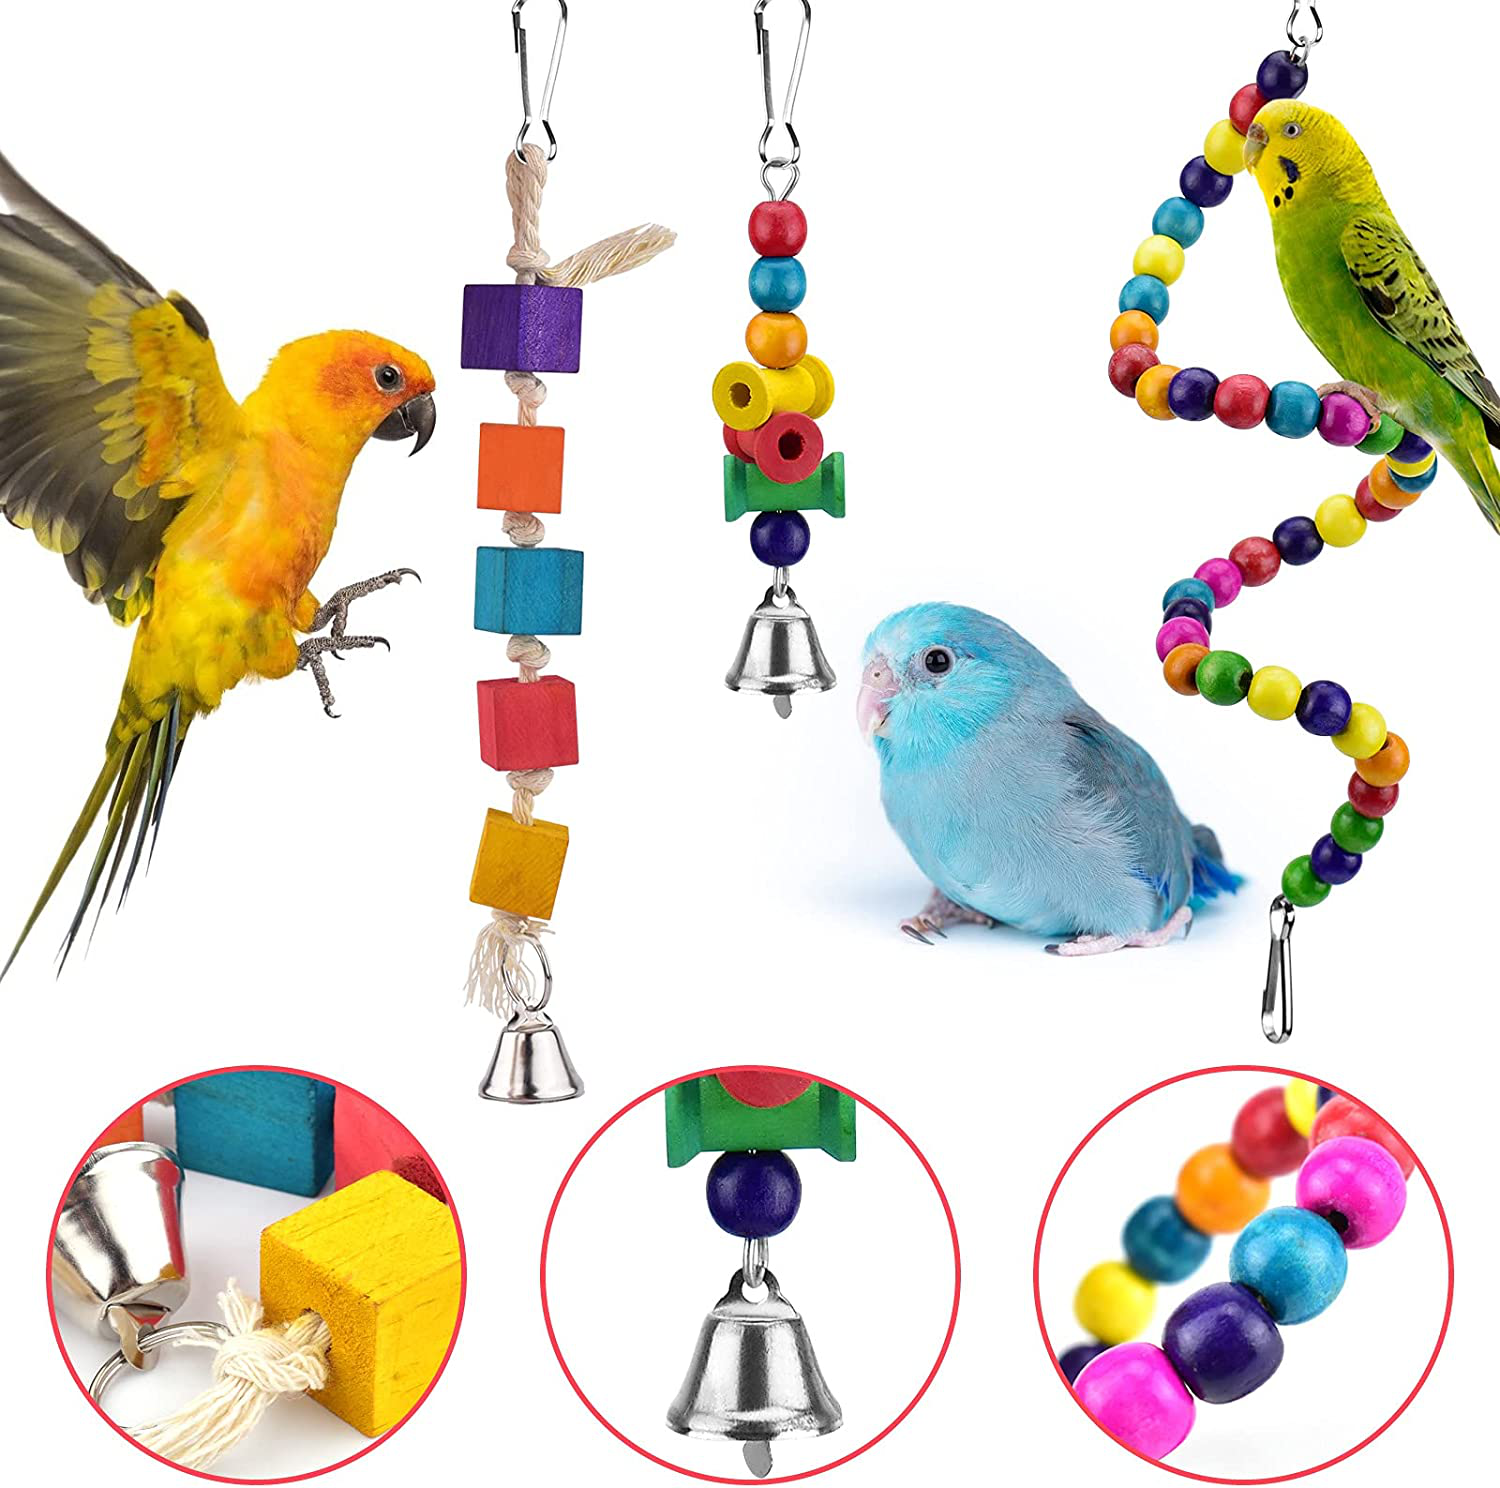 KATUMO Bird Toys, Natural Coconut Bird House with Colorful Ladder Hanging Chewing Toys Hammock Climbing Ladder Bird Colorful Toys with Bells for Parakeet, Conure, Cockatiel, Mynah, Love Birds, Finch